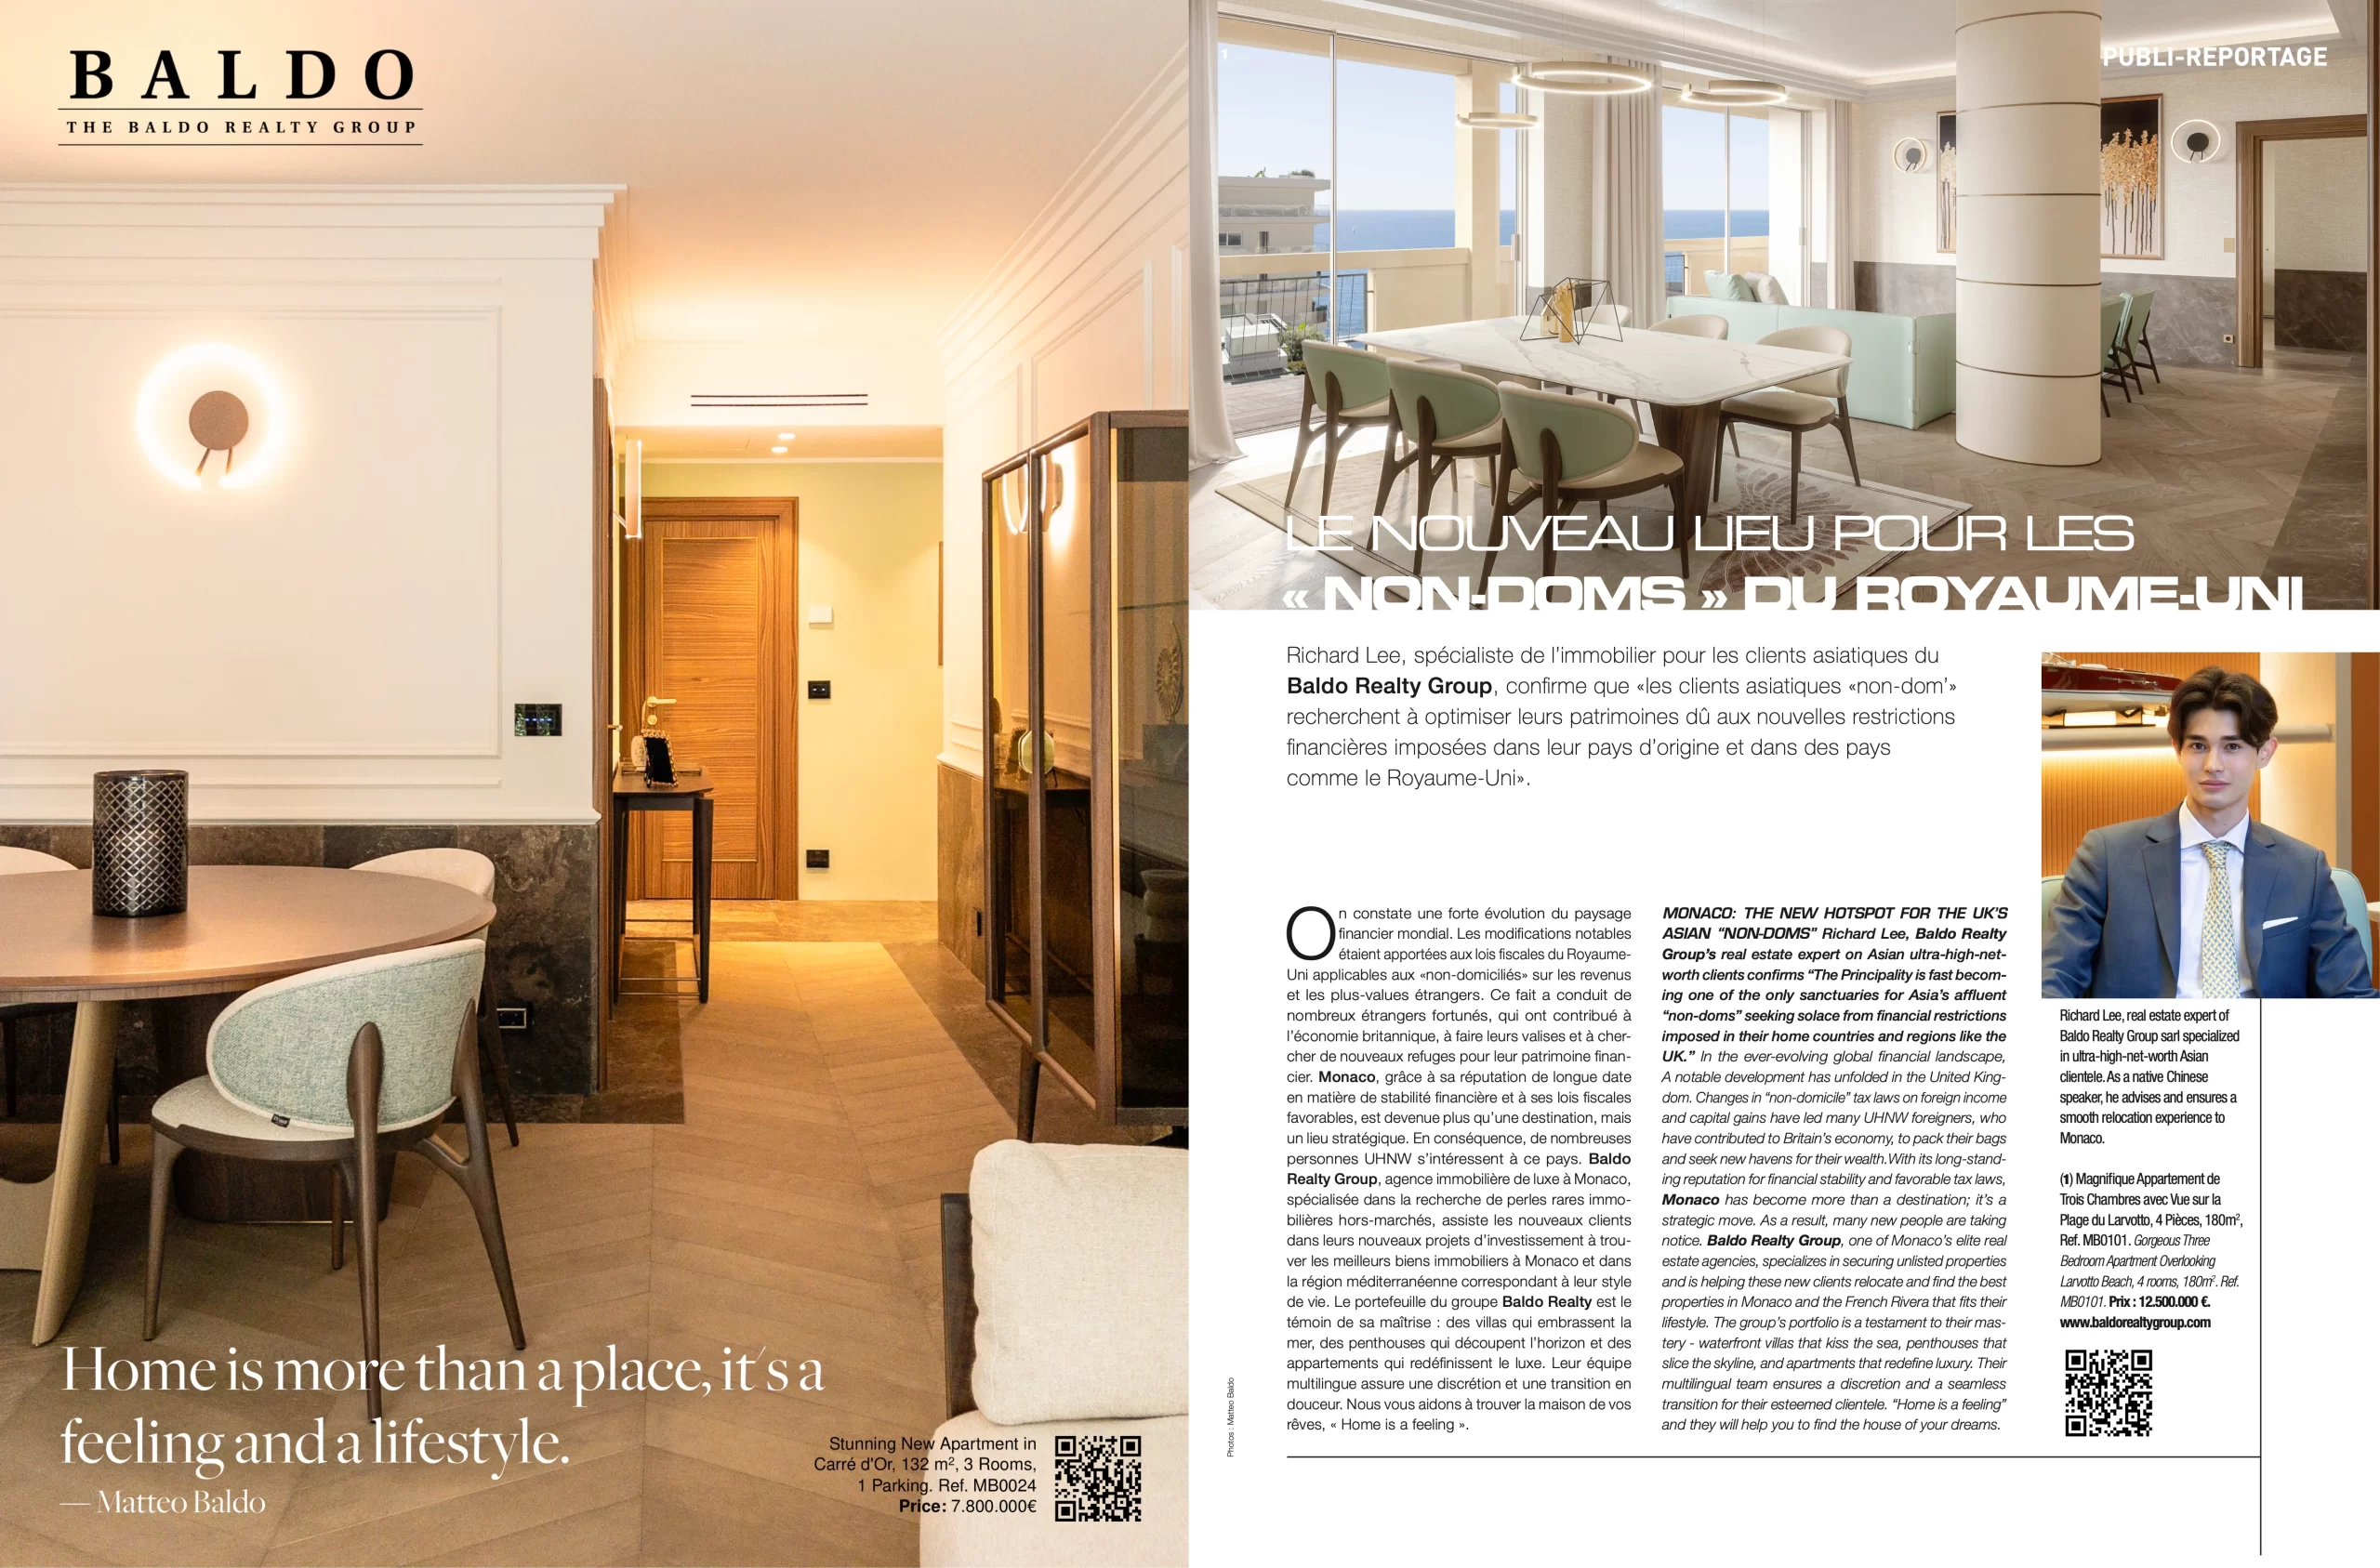 An article for Baldo Realty Group and Richard Lee Canali for Residences Immobilier in June 2024. In this photo you see the left page of an apartment in Le Montaigne Residence in Monaco. and the quote "home is more than a place, its a feeling and a lifestyle" on the right page you see a photo of Le Calypso Residence in Monaco, a photo of Richard Canali, and the article in French and English. The title is "MONACO: THE NEW HOTSPOT FOR THE UK’S ASIAN "NON-DOMS"